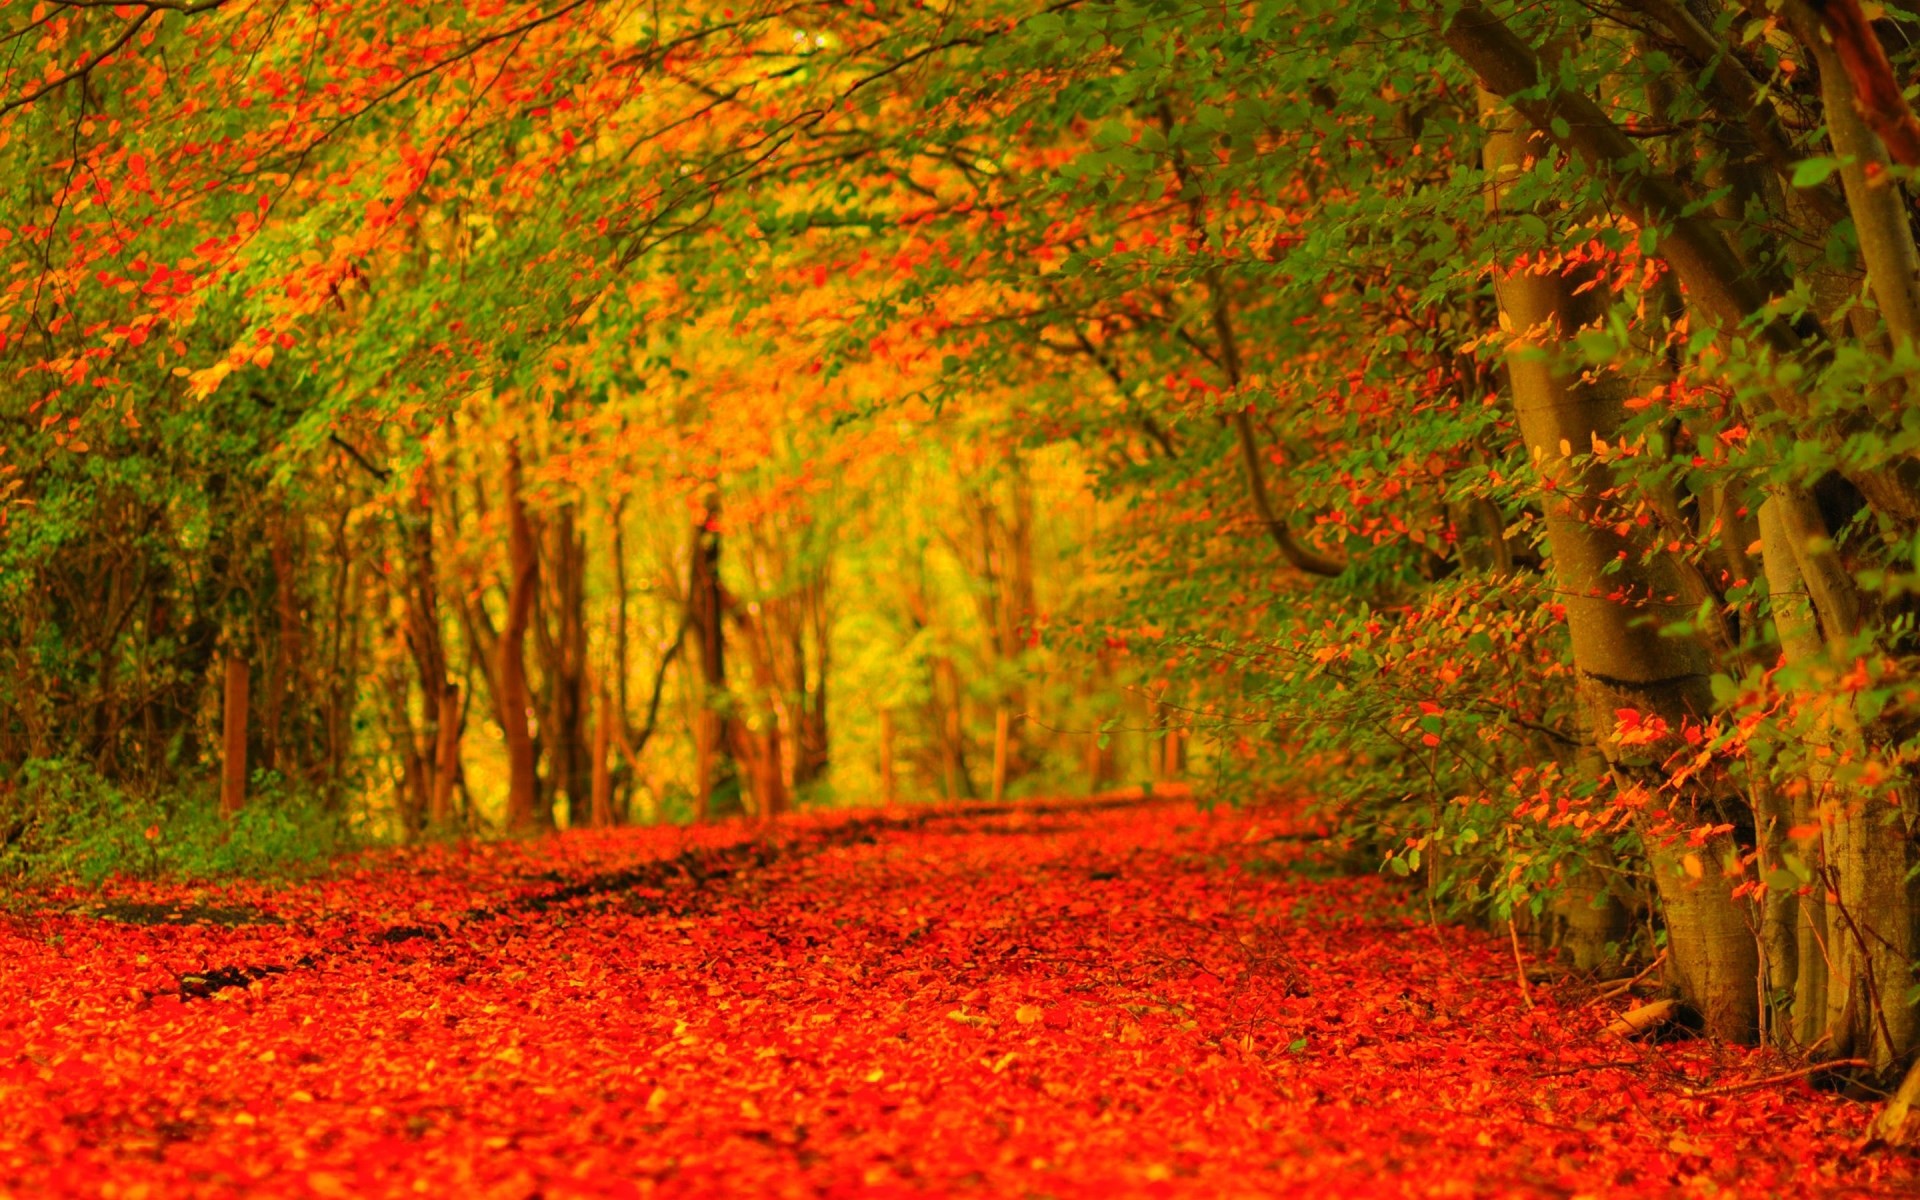 1920x1200 fall desktop background pictures free | sharovarka | Pinterest | Fall  desktop backgrounds, Desktop background pictures and Desktop backgrounds